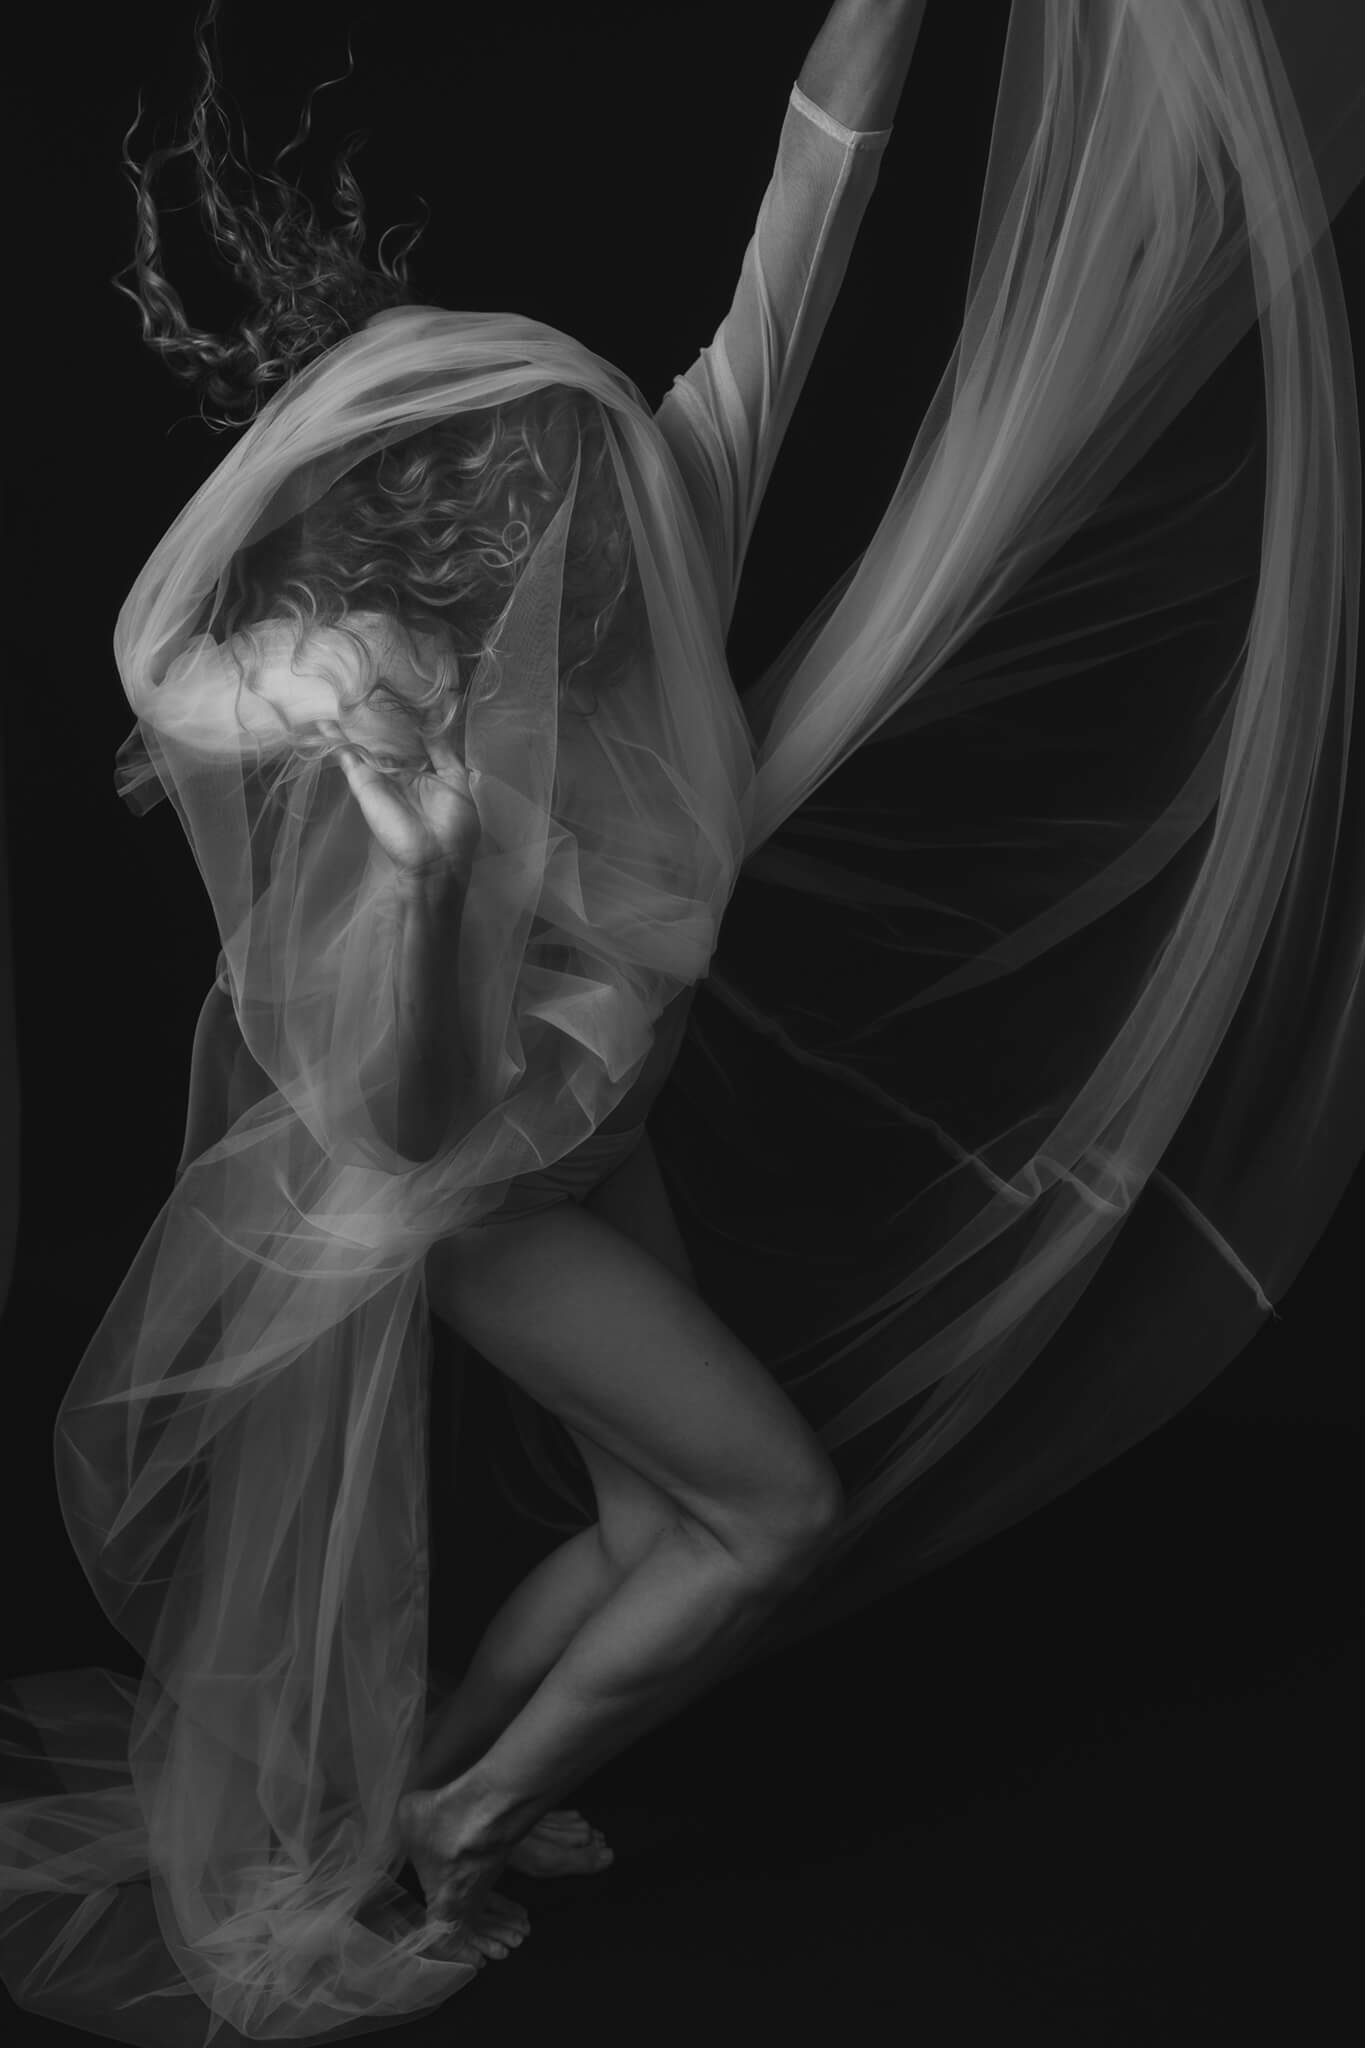 Dancer is throwing her tulle dress in a photo in black and white in an artistic way